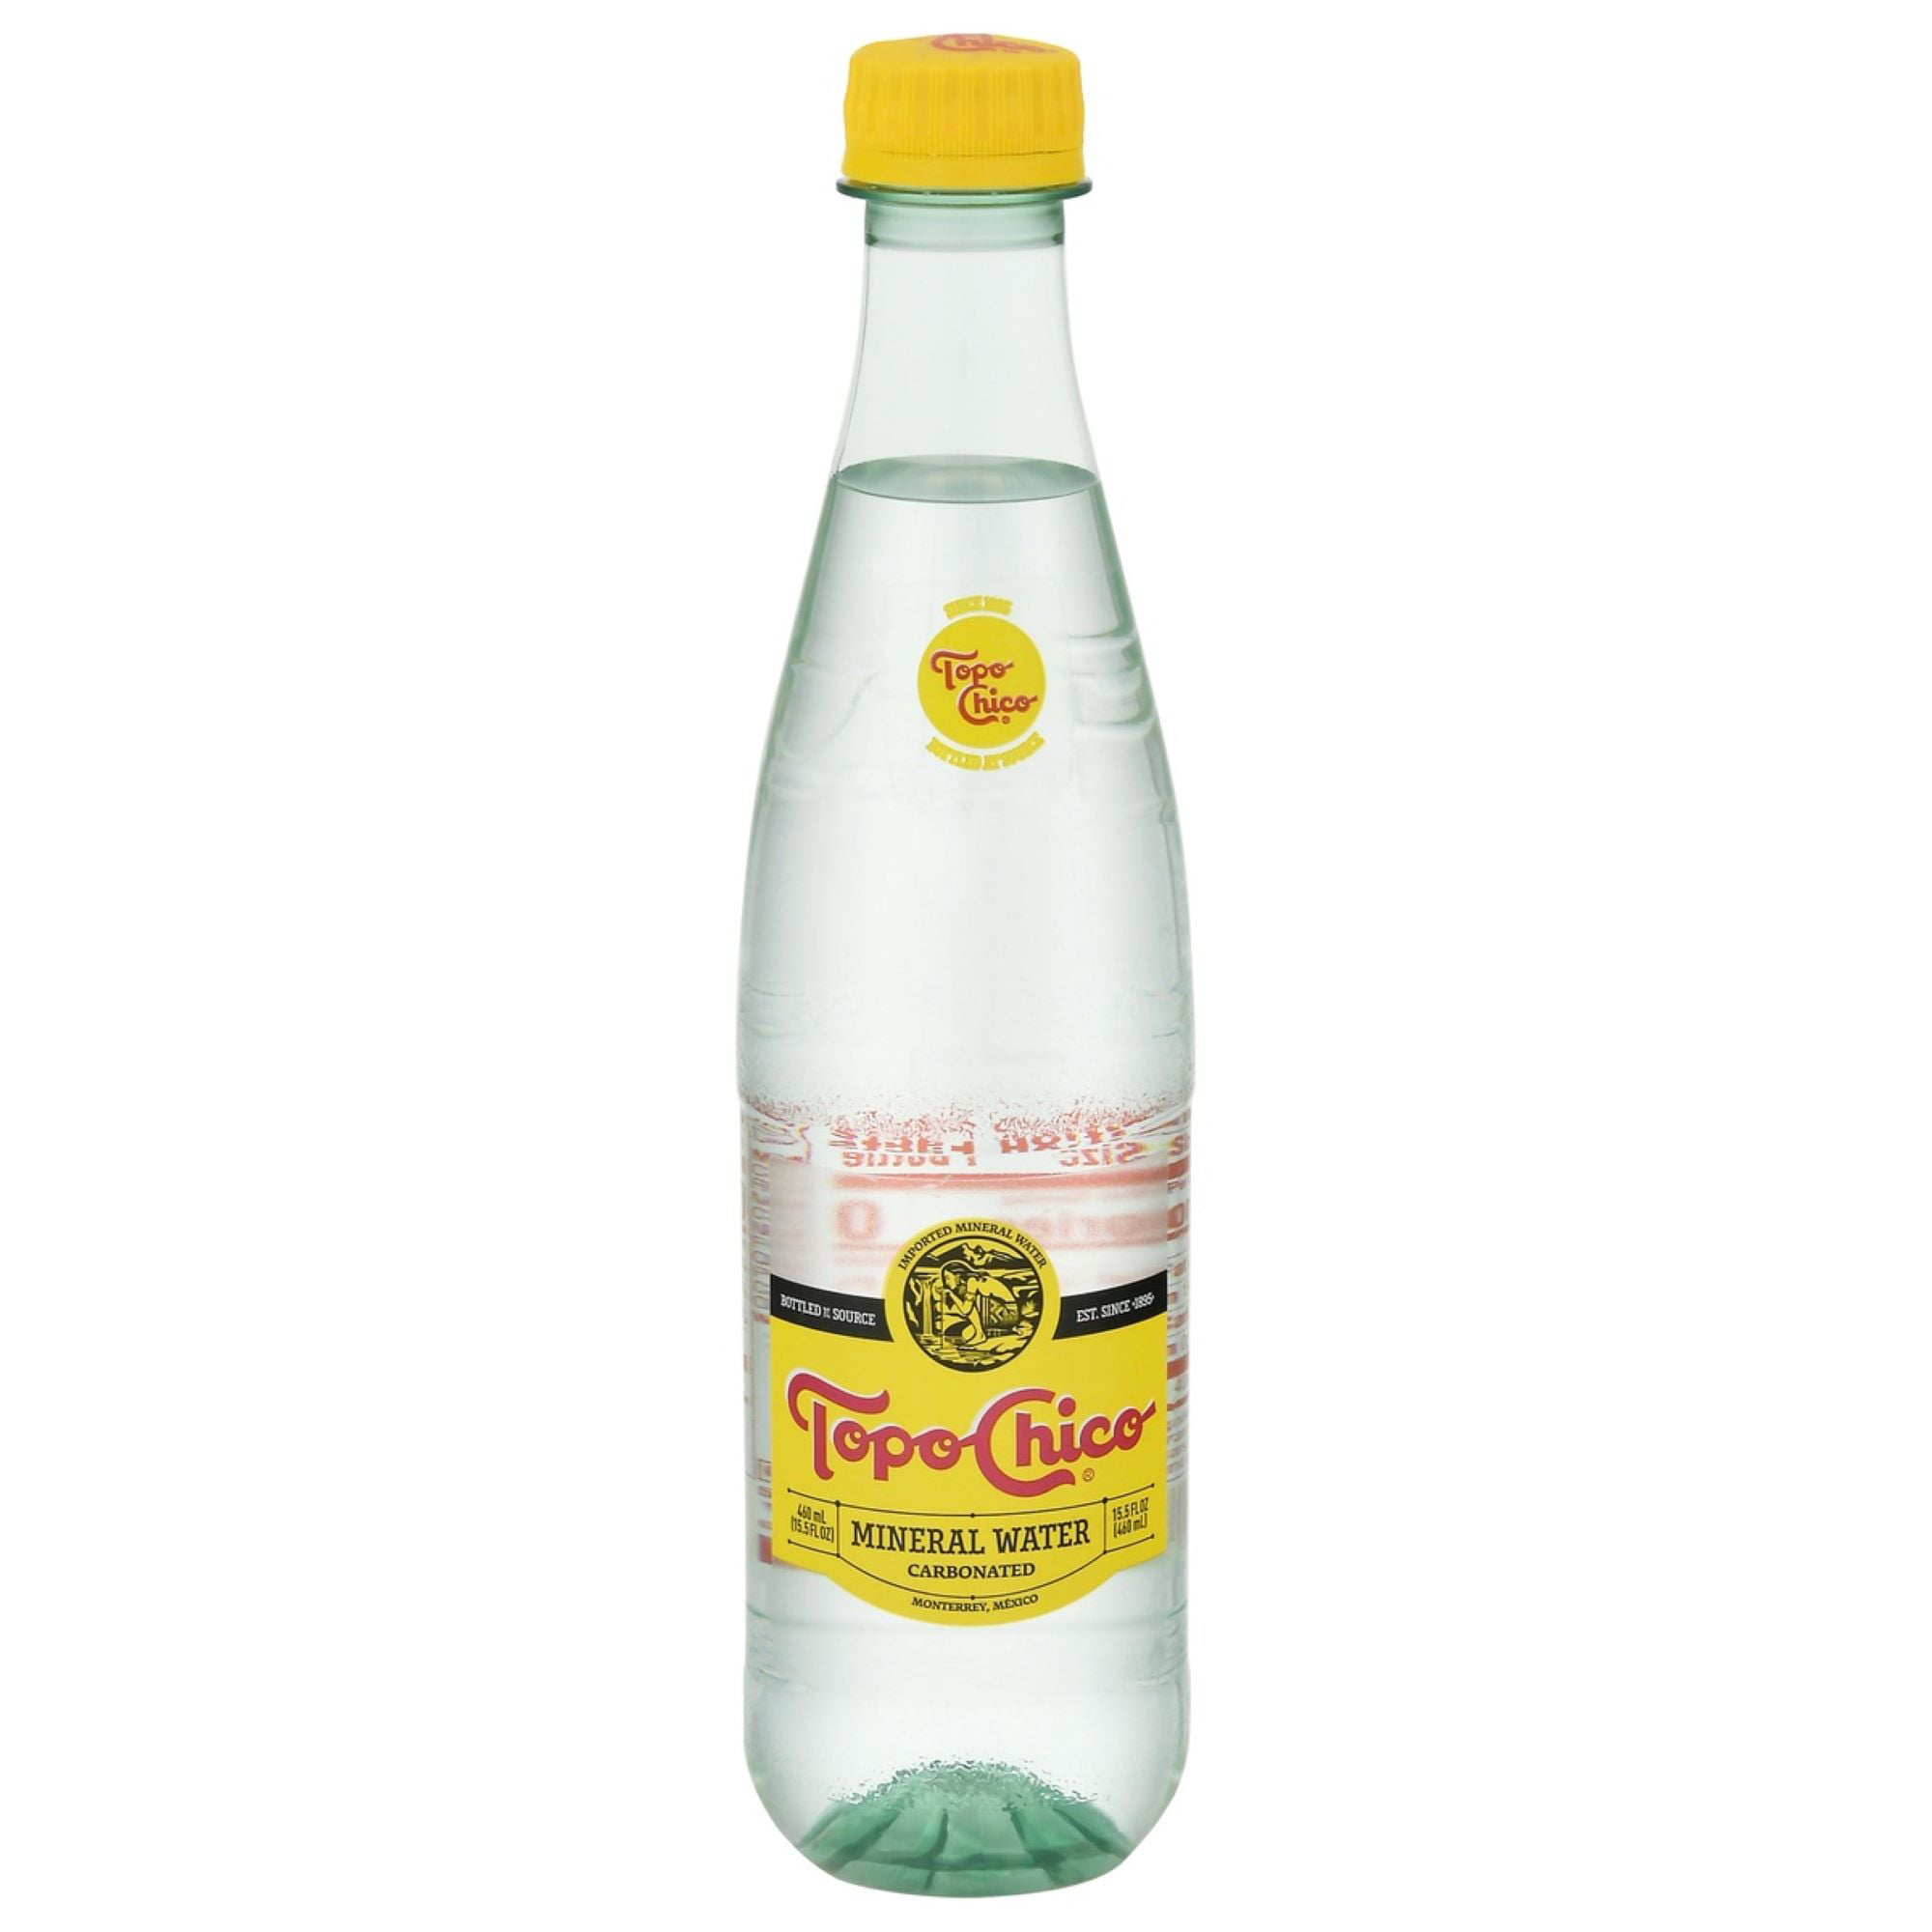 Topo Chico Mineral Water Glass Bottles, 12 fl oz, 12 Pack